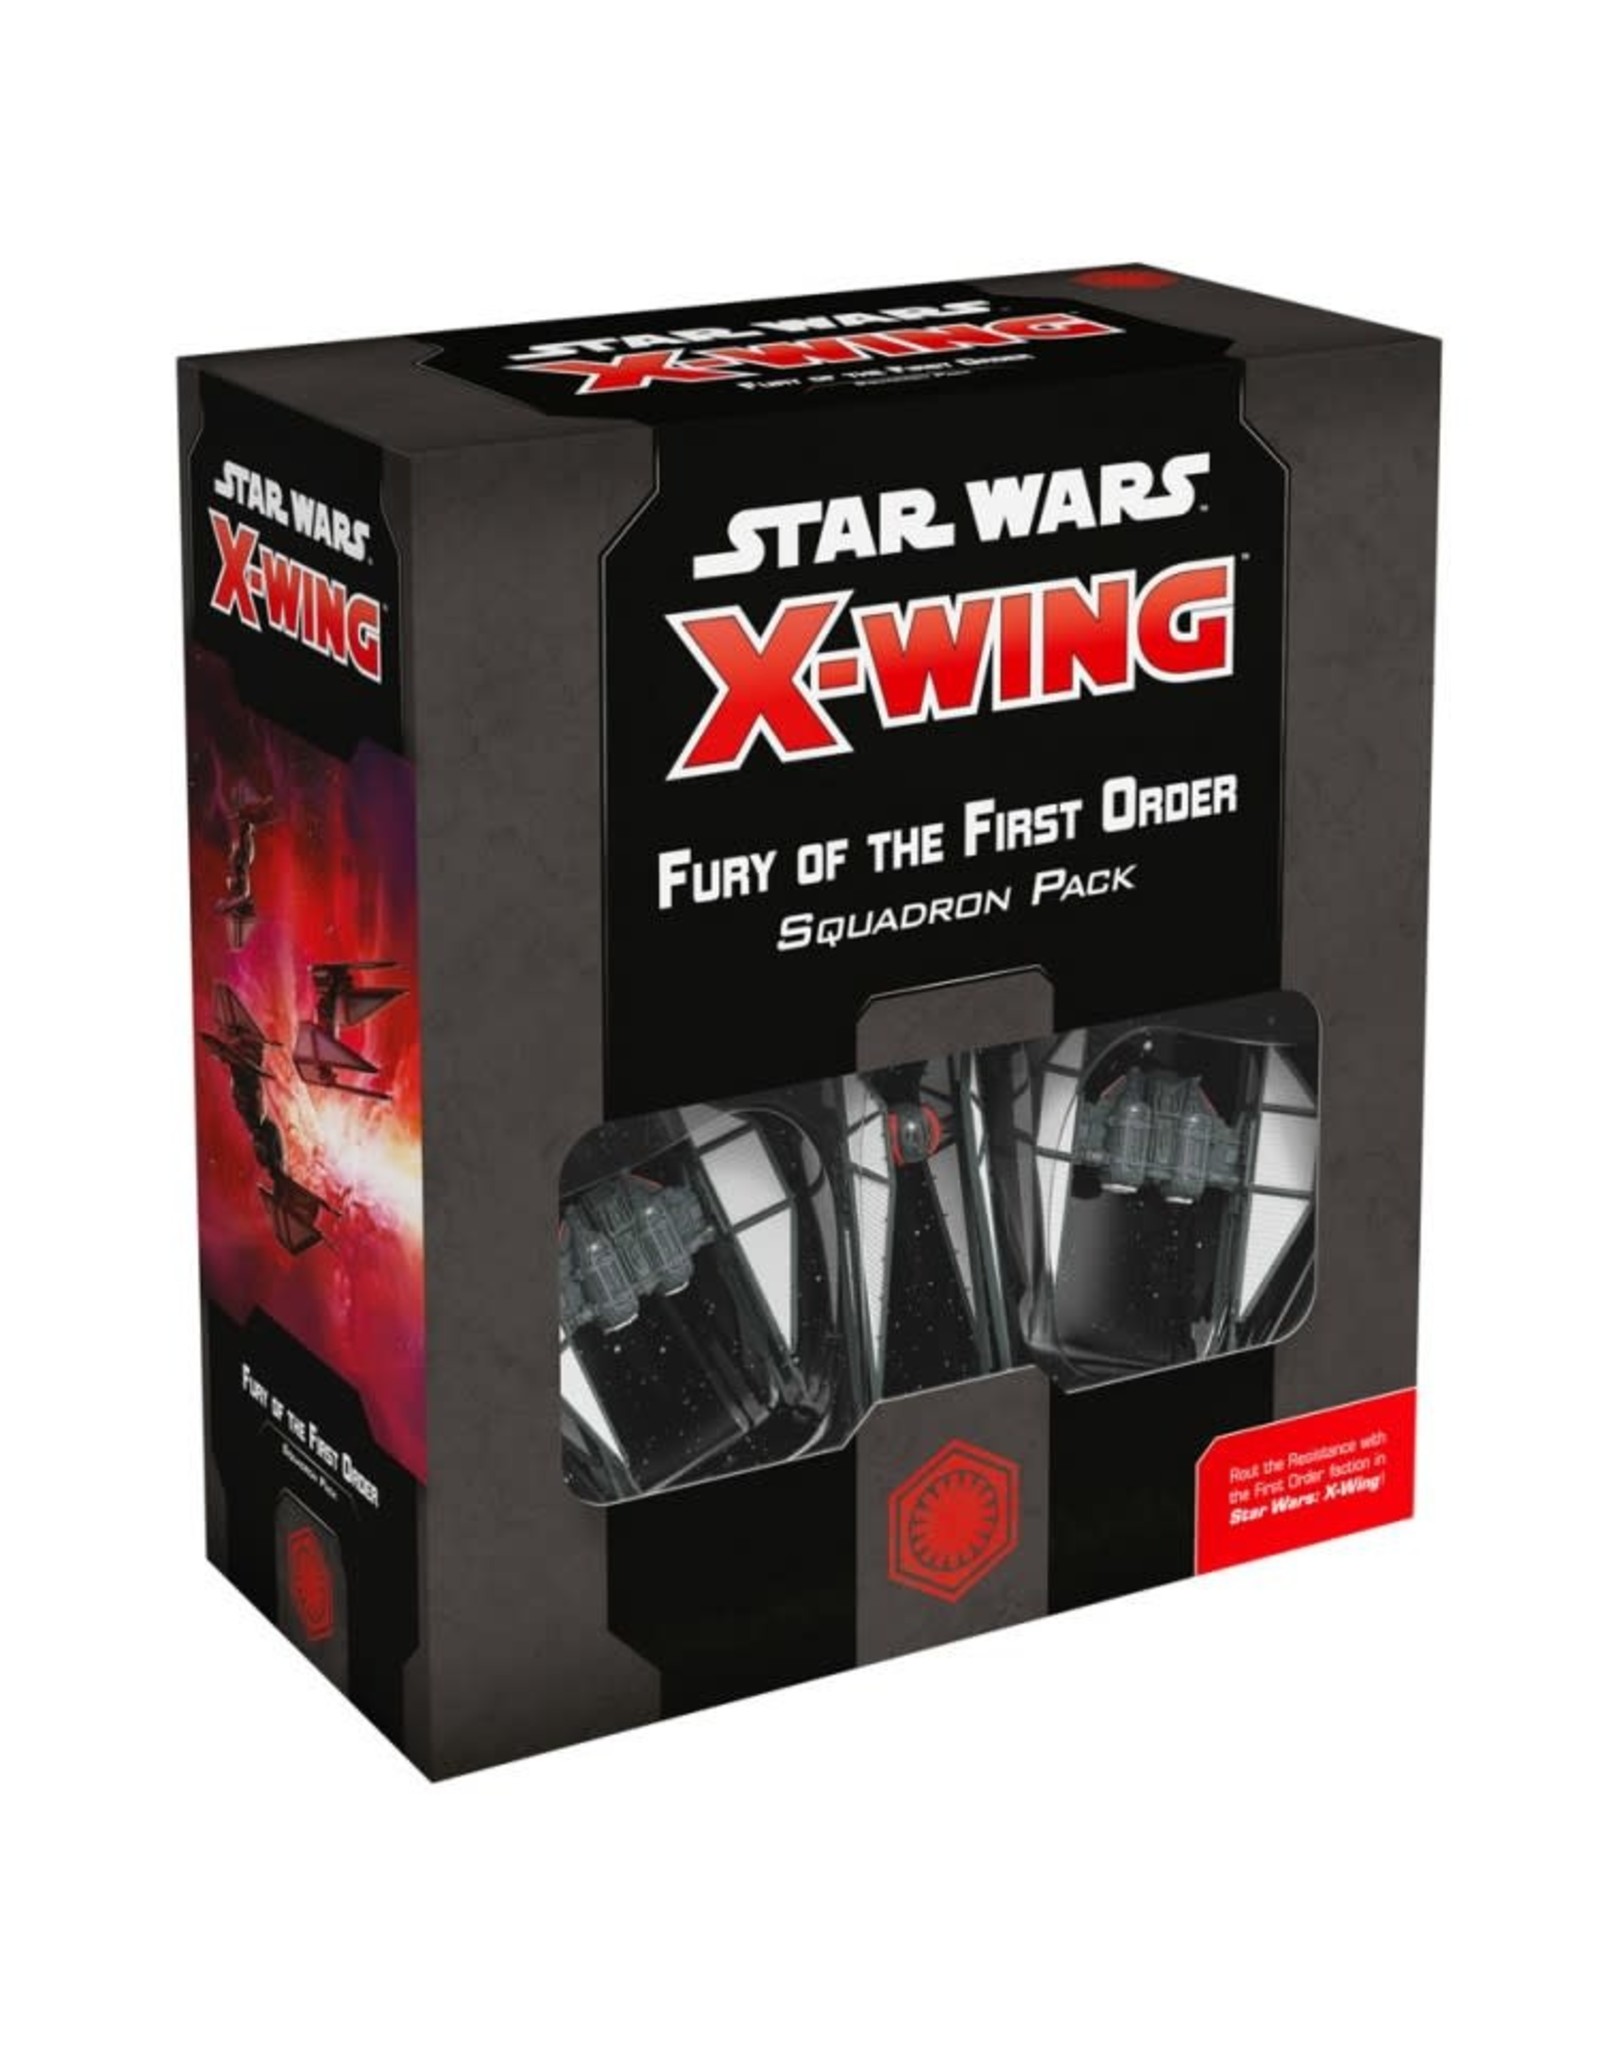 Atomic Mass Games Star Wars X-Wing: 2nd Edition - Fury of the First Order Squadron Pack